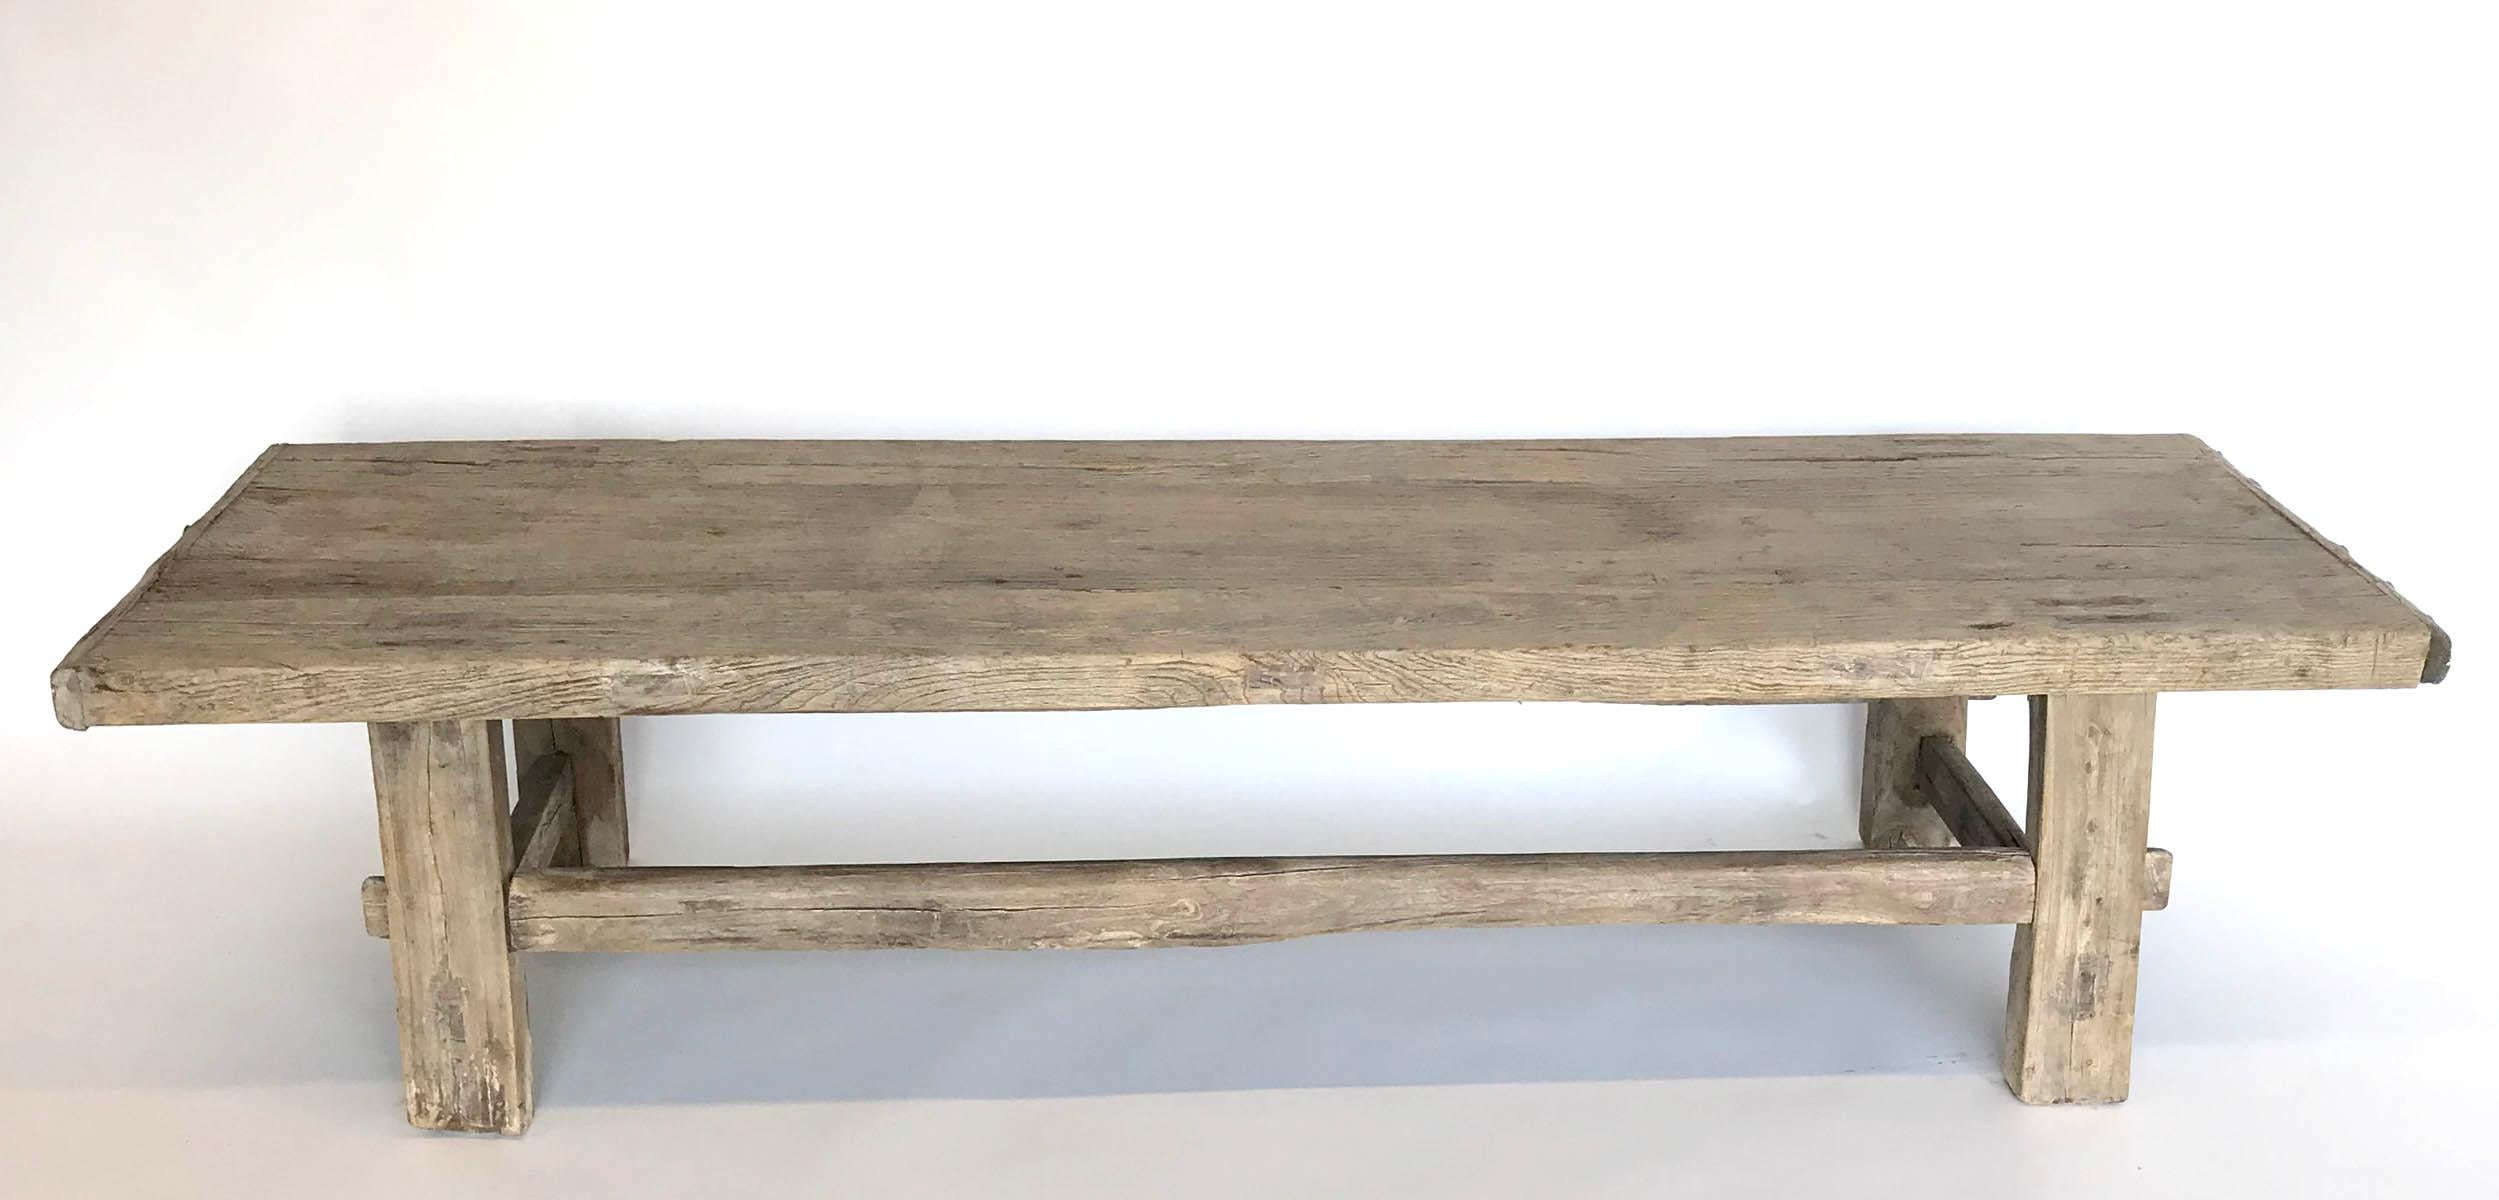 Antique elm wood bench with original nails, double mortise and tenon construction. Great natural, weathered patina. Works well as a bench, coffee table or low console.